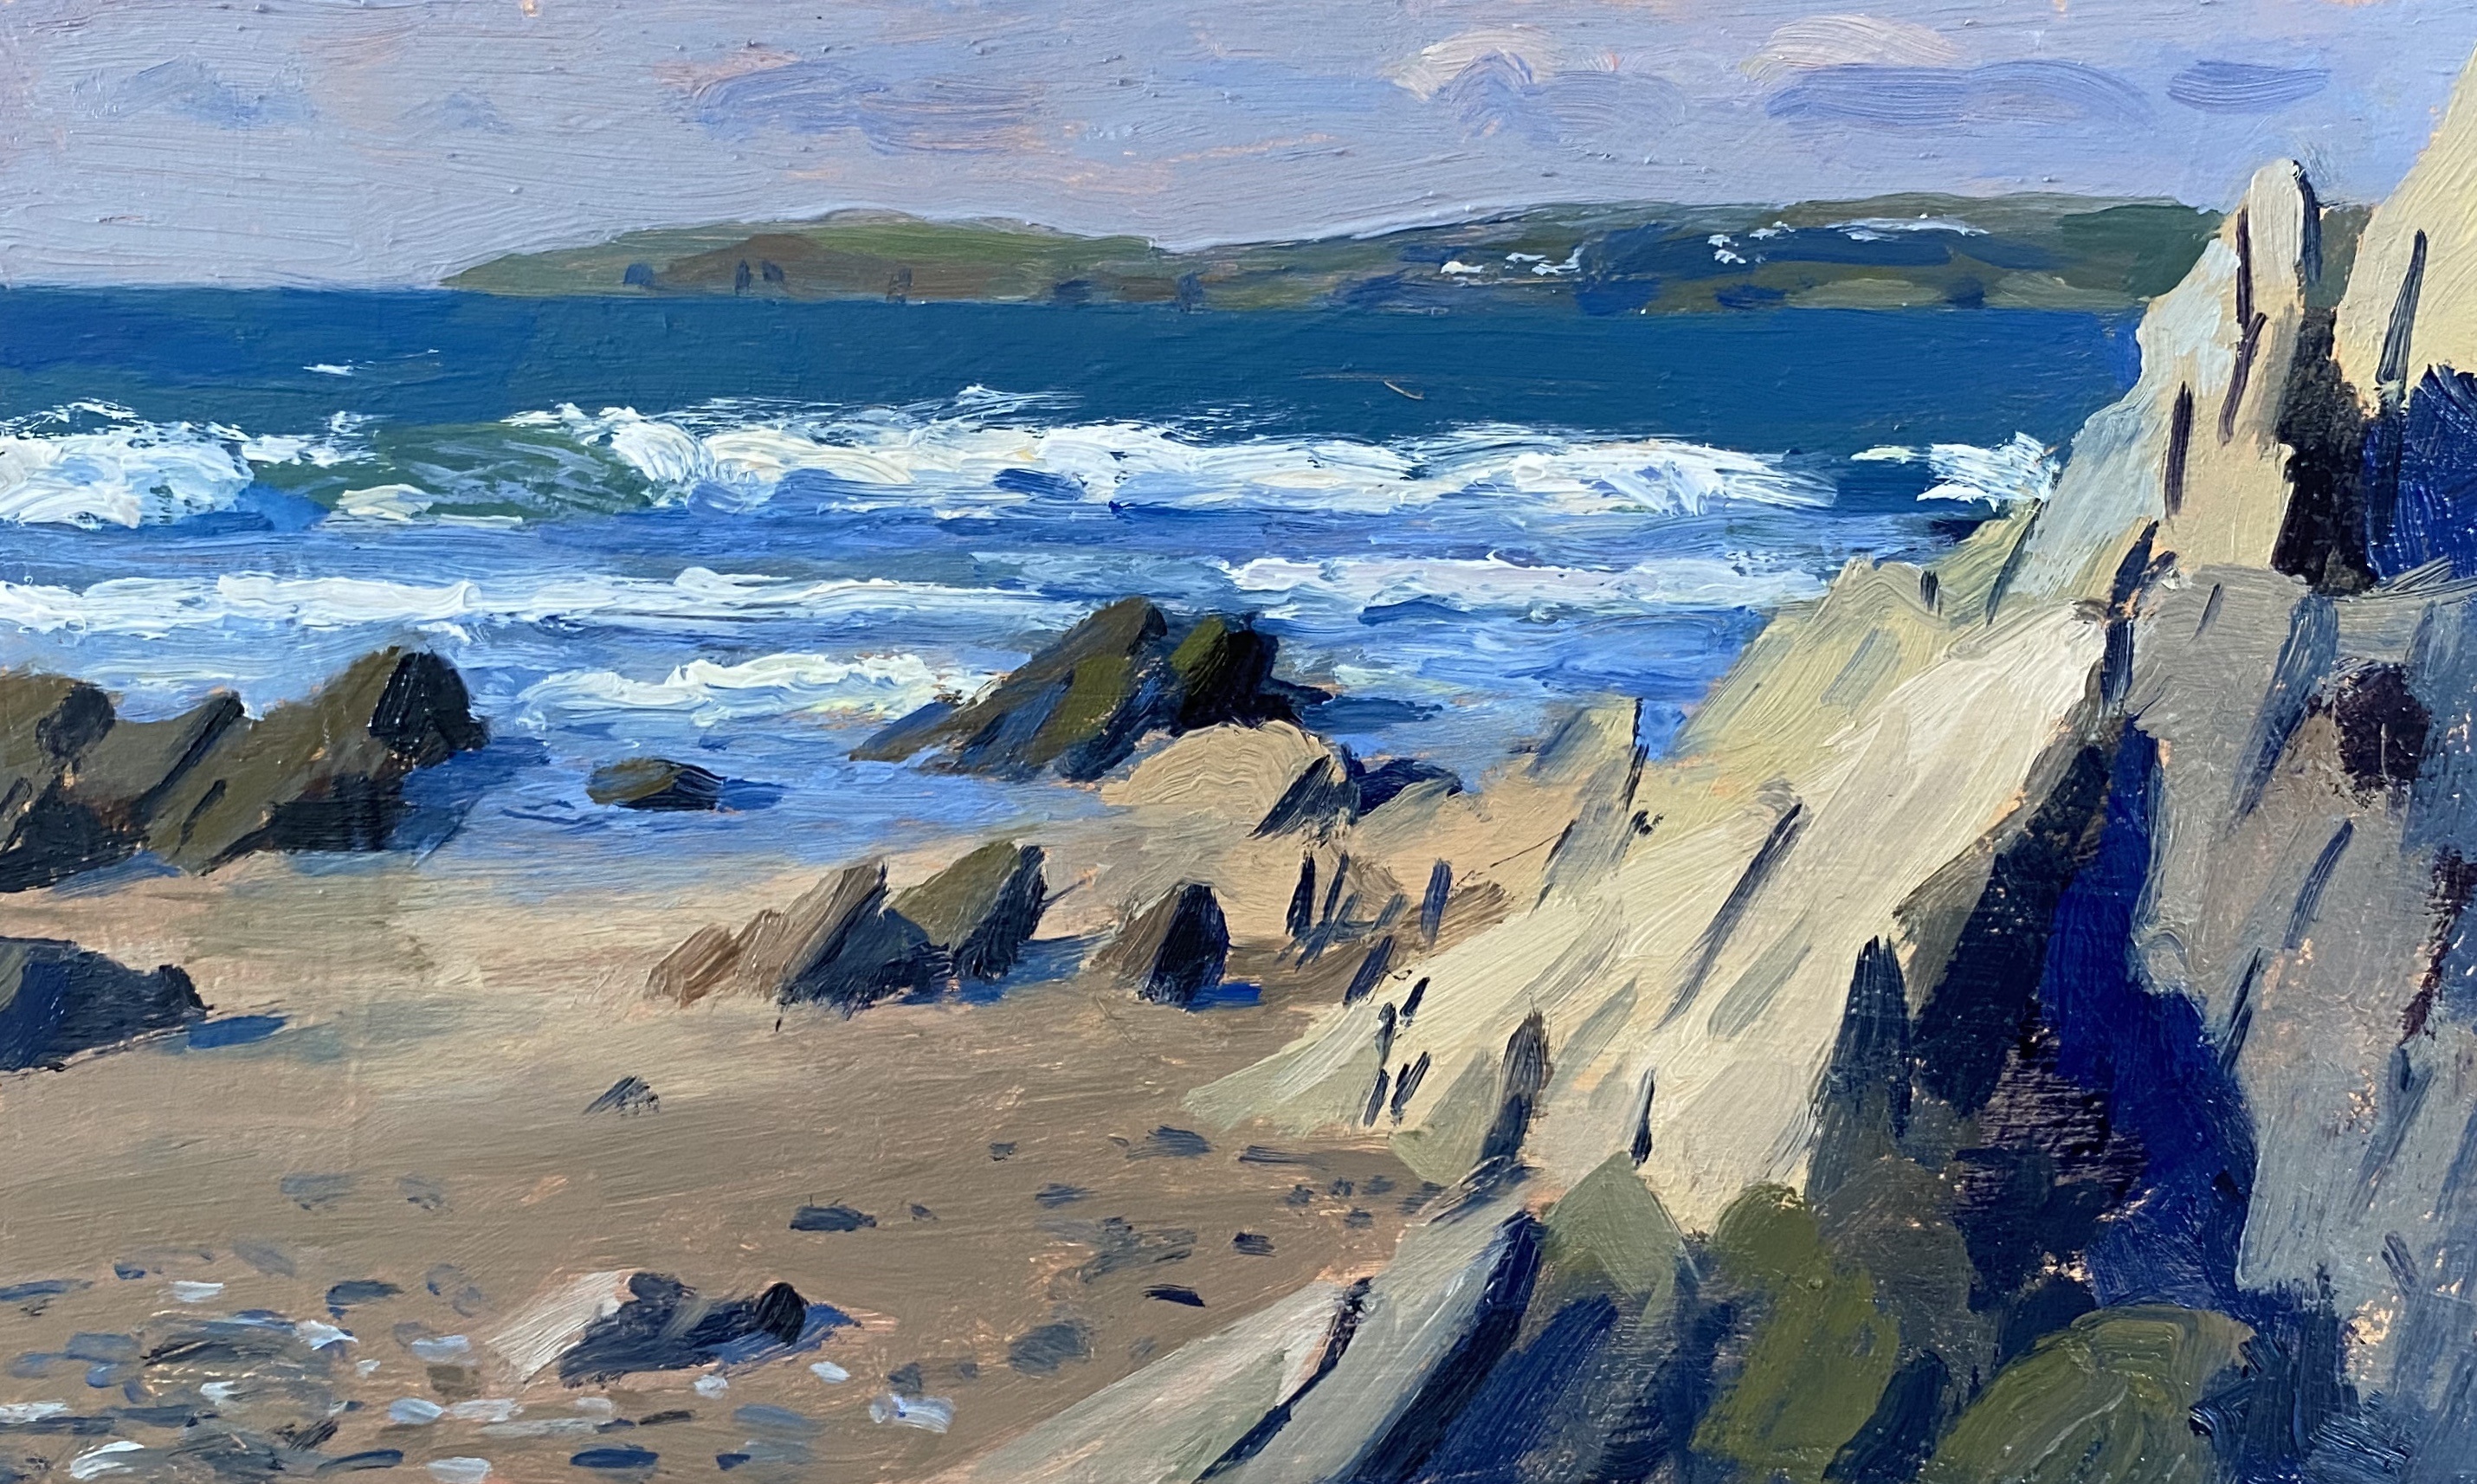 Daisy's painting 'Crashing Waves, Pendower Beach' was exhibited with The Royal Society of Marine Artists